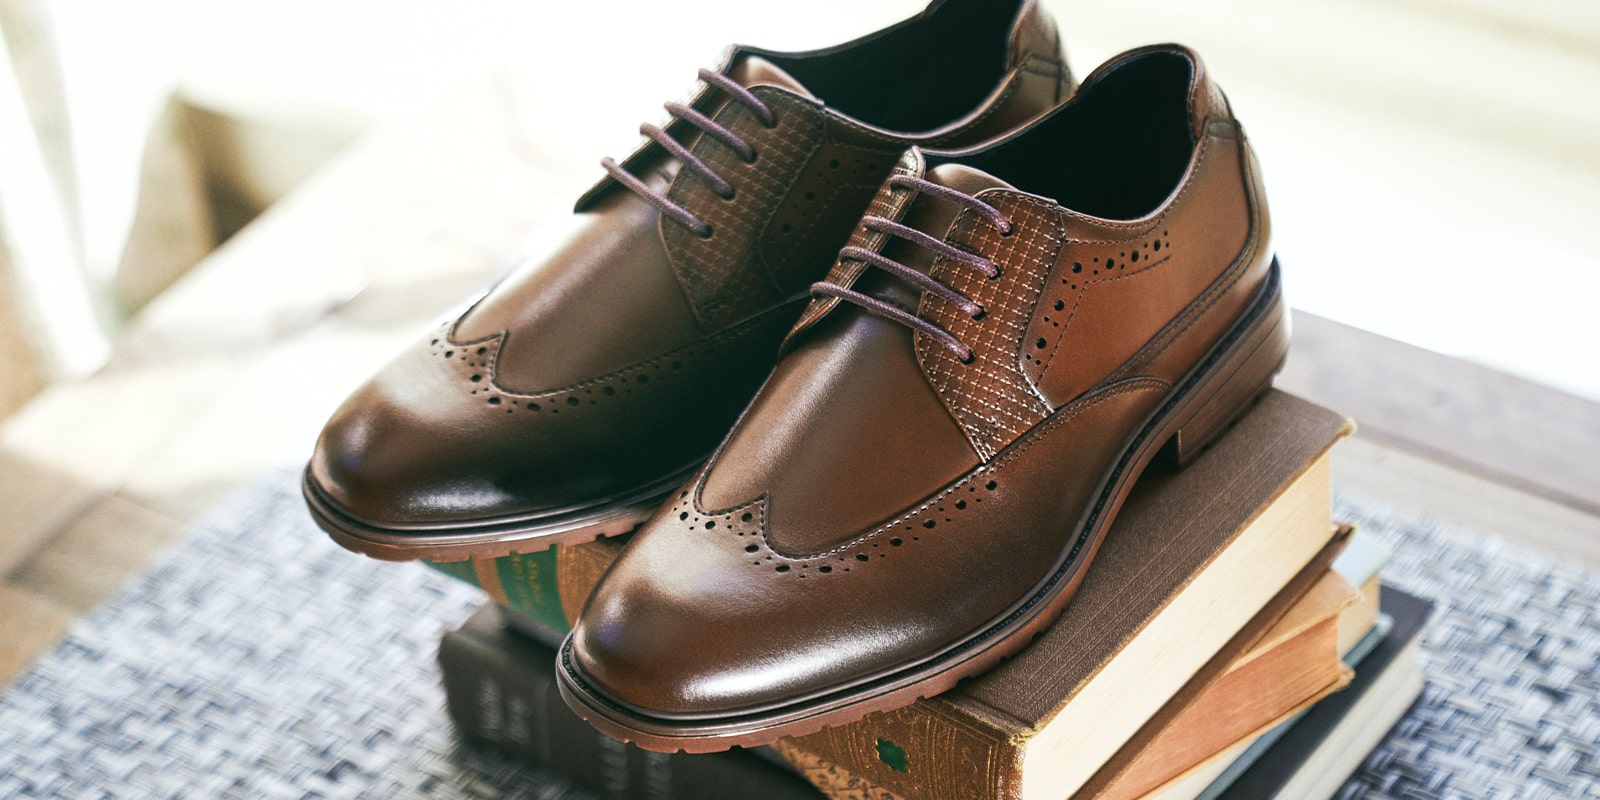 The featured product is the Rooney Wingtip Oxford in Cognac.